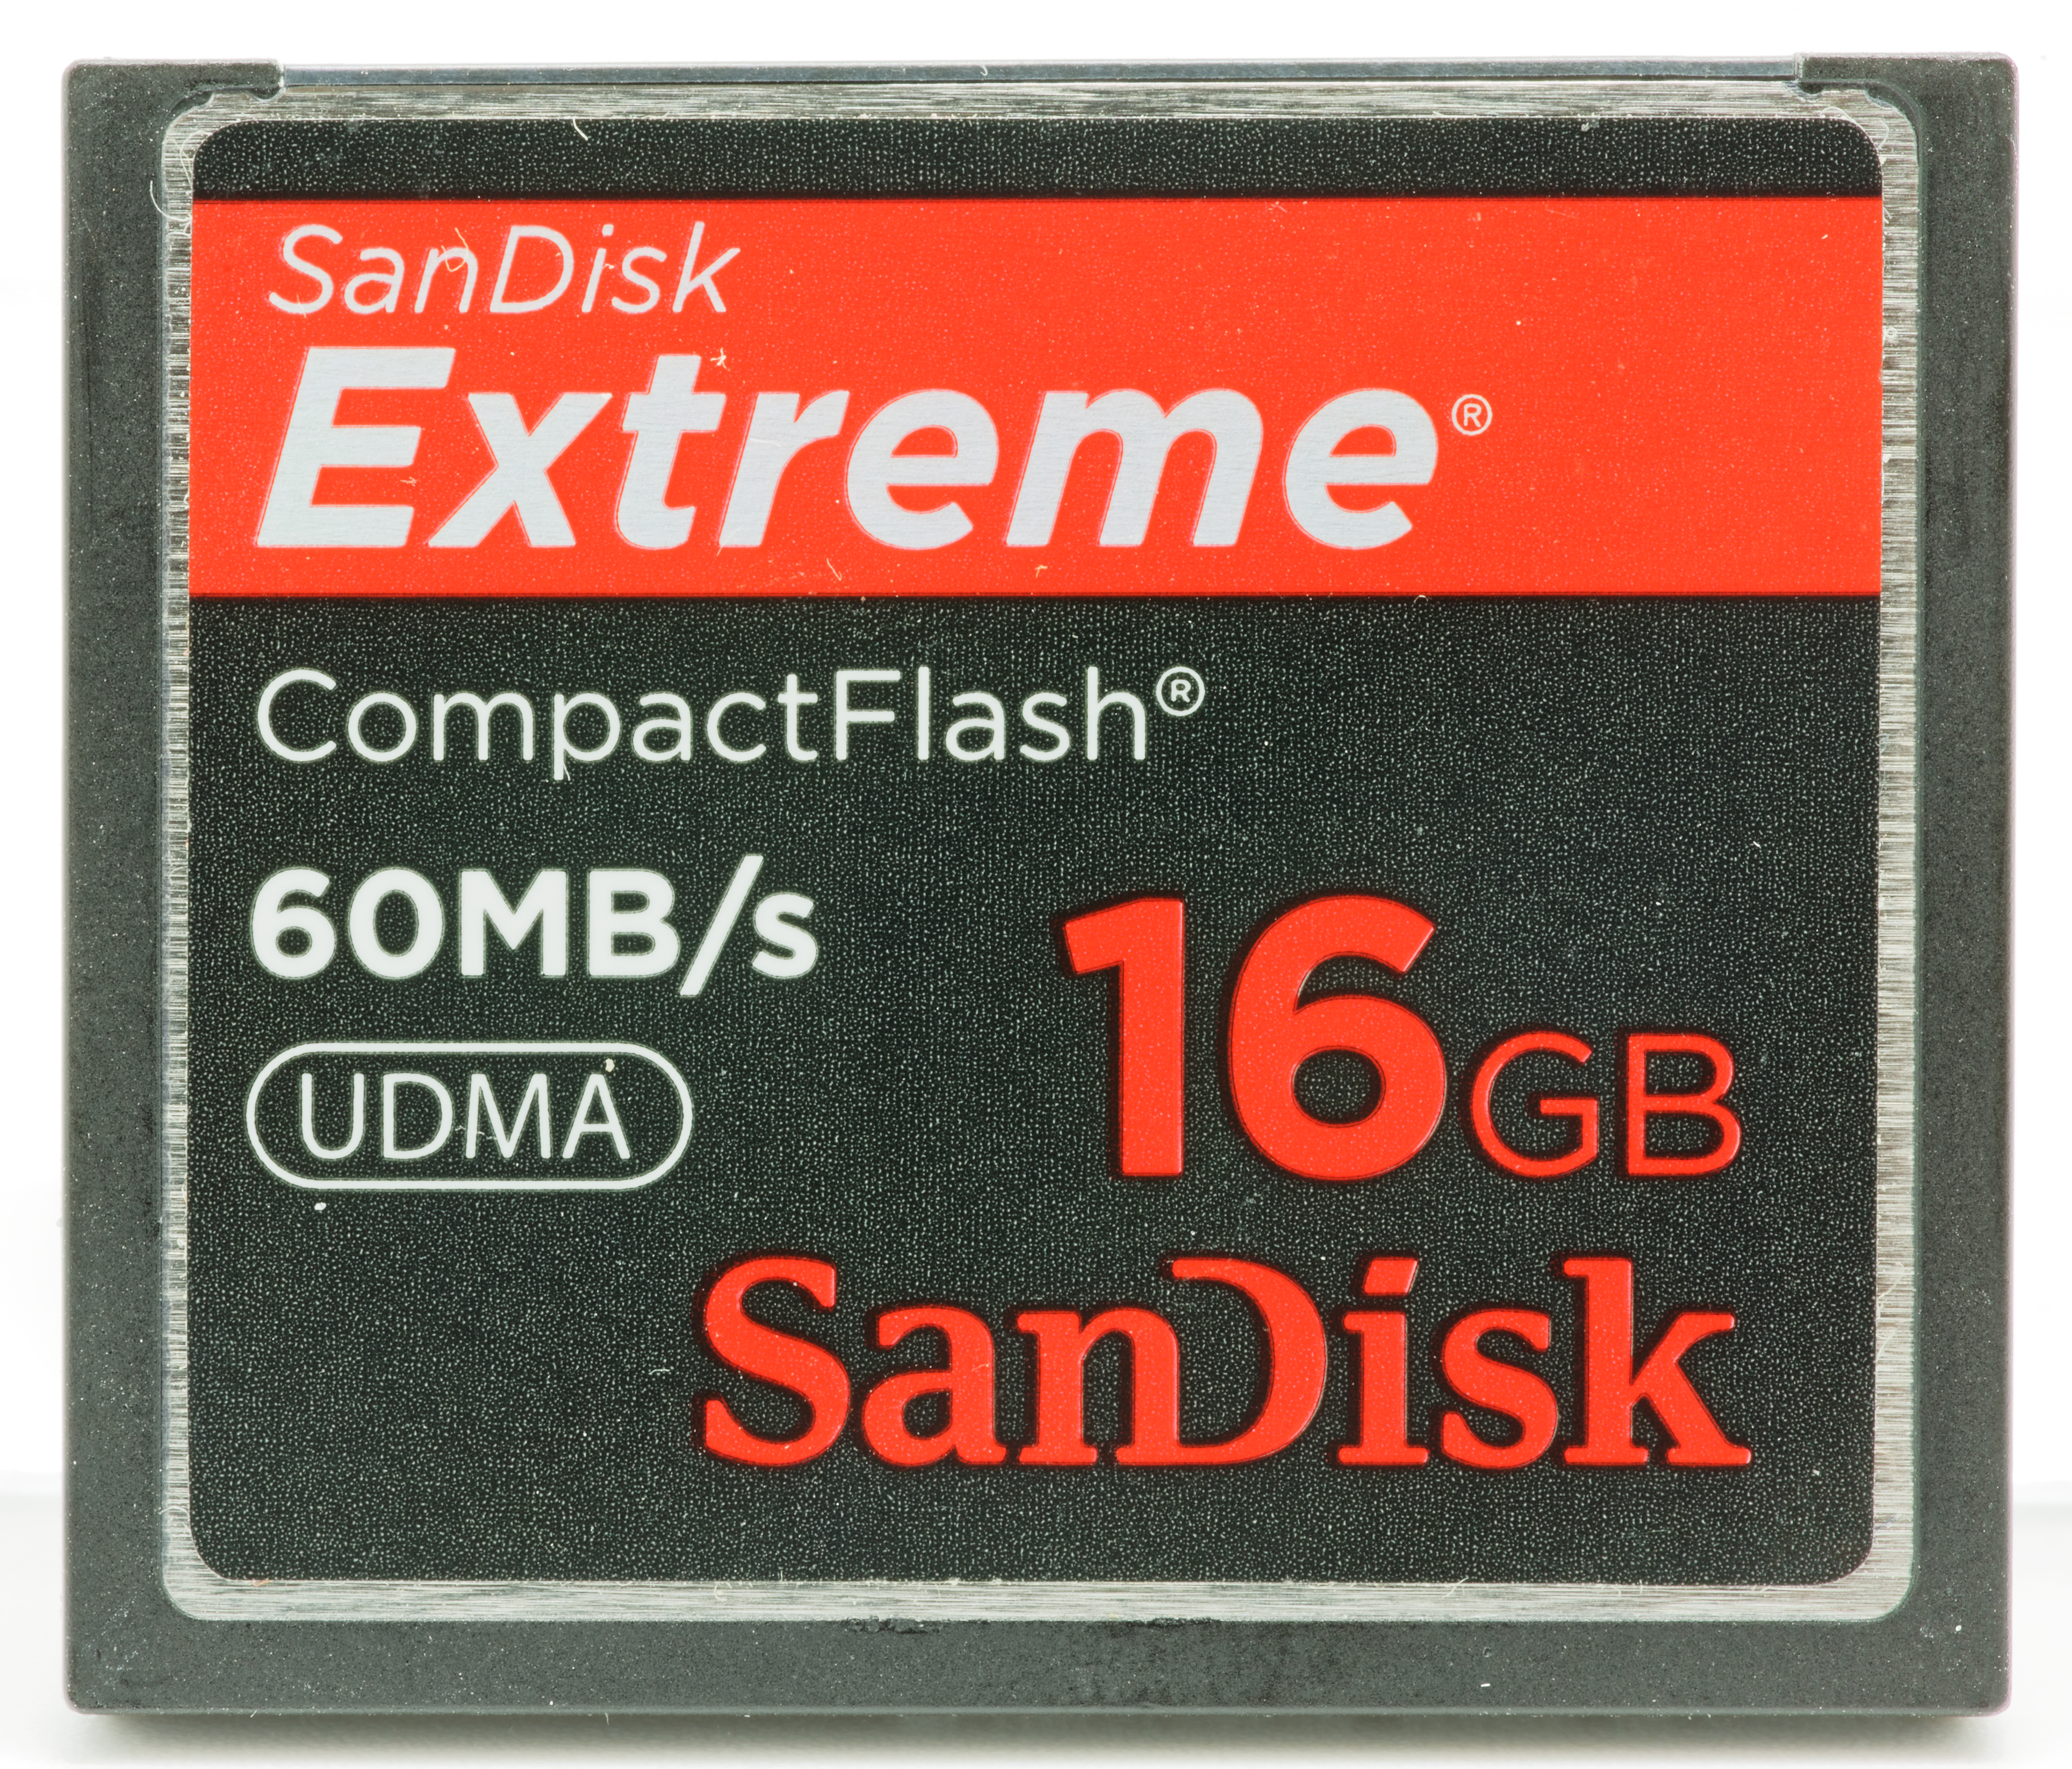 SANDISK Extreme CompactFlash card 16 GB 60 MBs - 2015 - 005